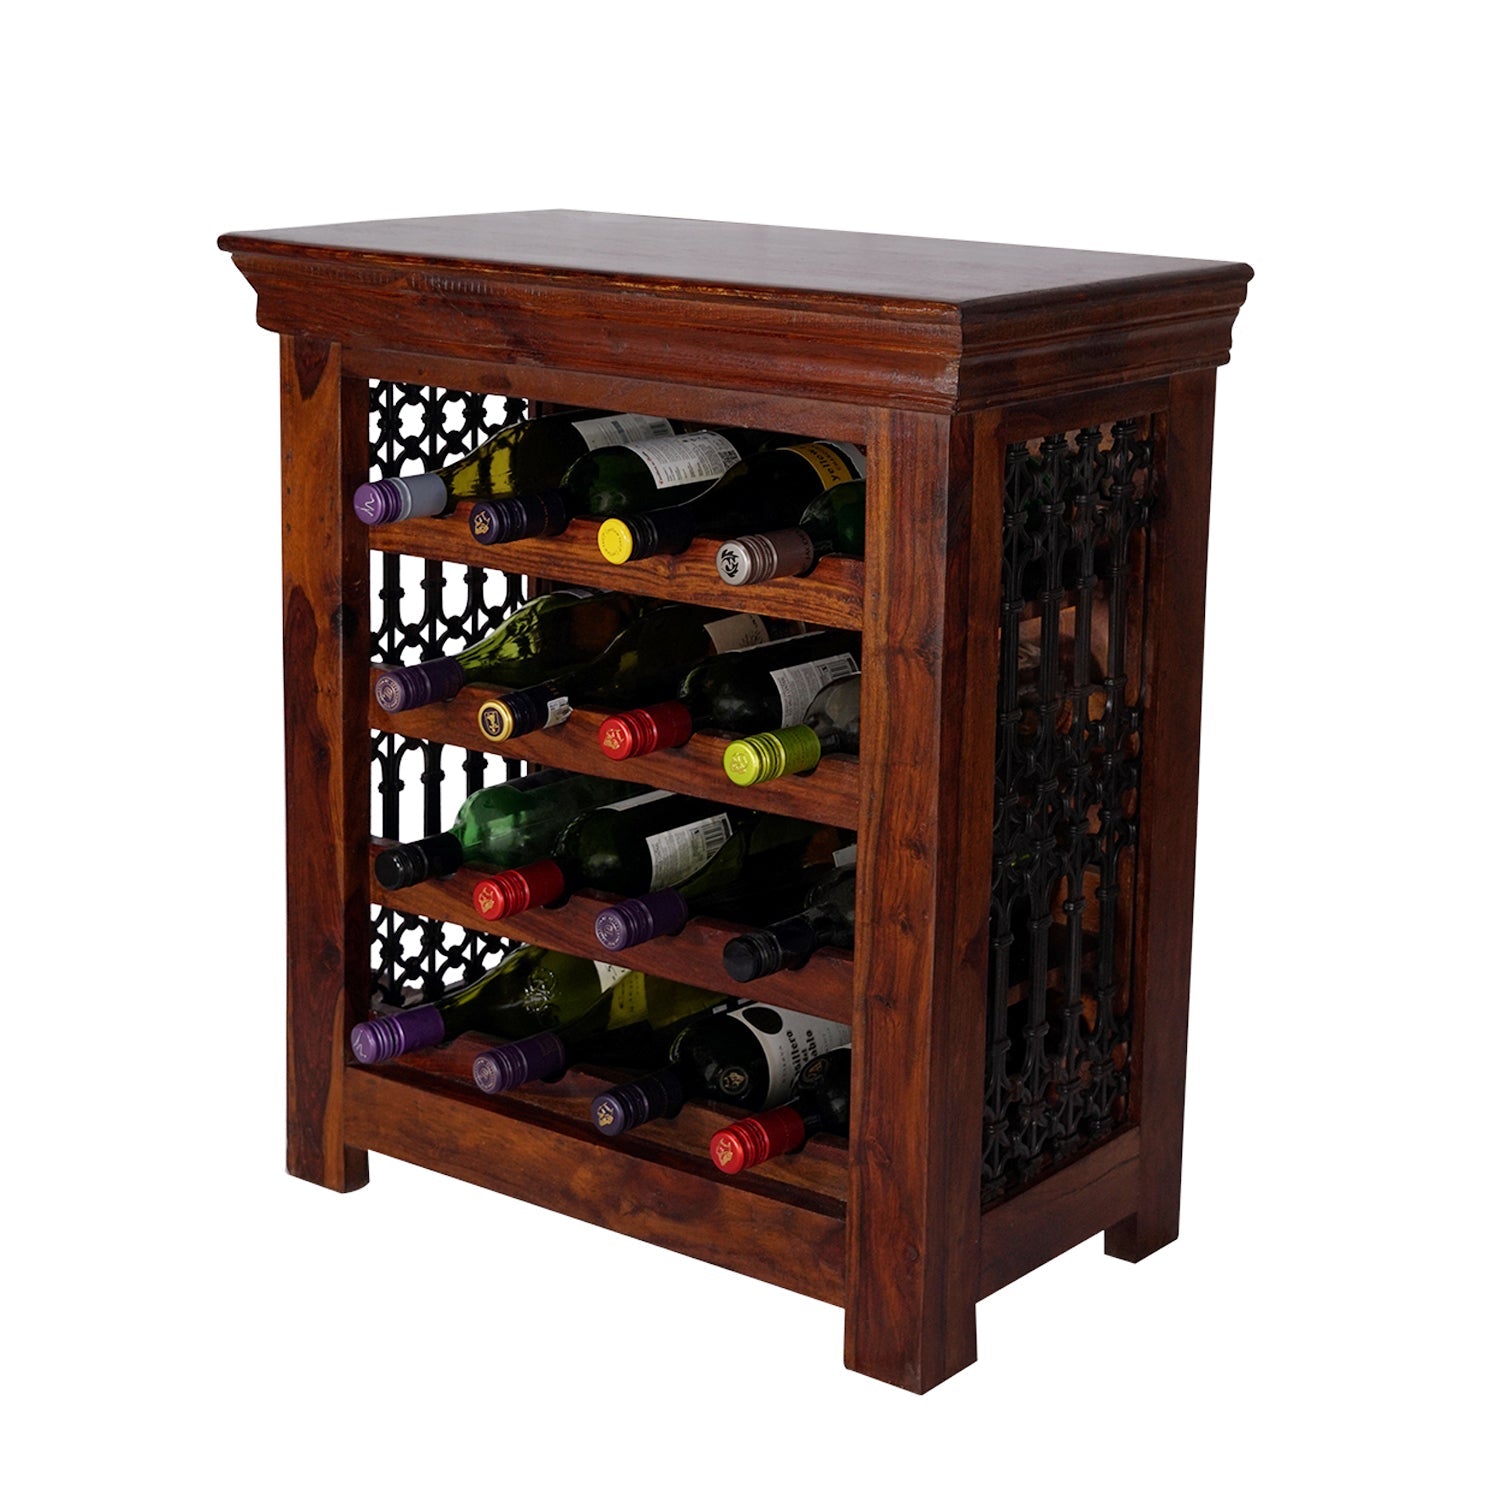 Indian Handcrafted Wooden Wine Rack with Jali Design for upto 16 bottles - Stylla London